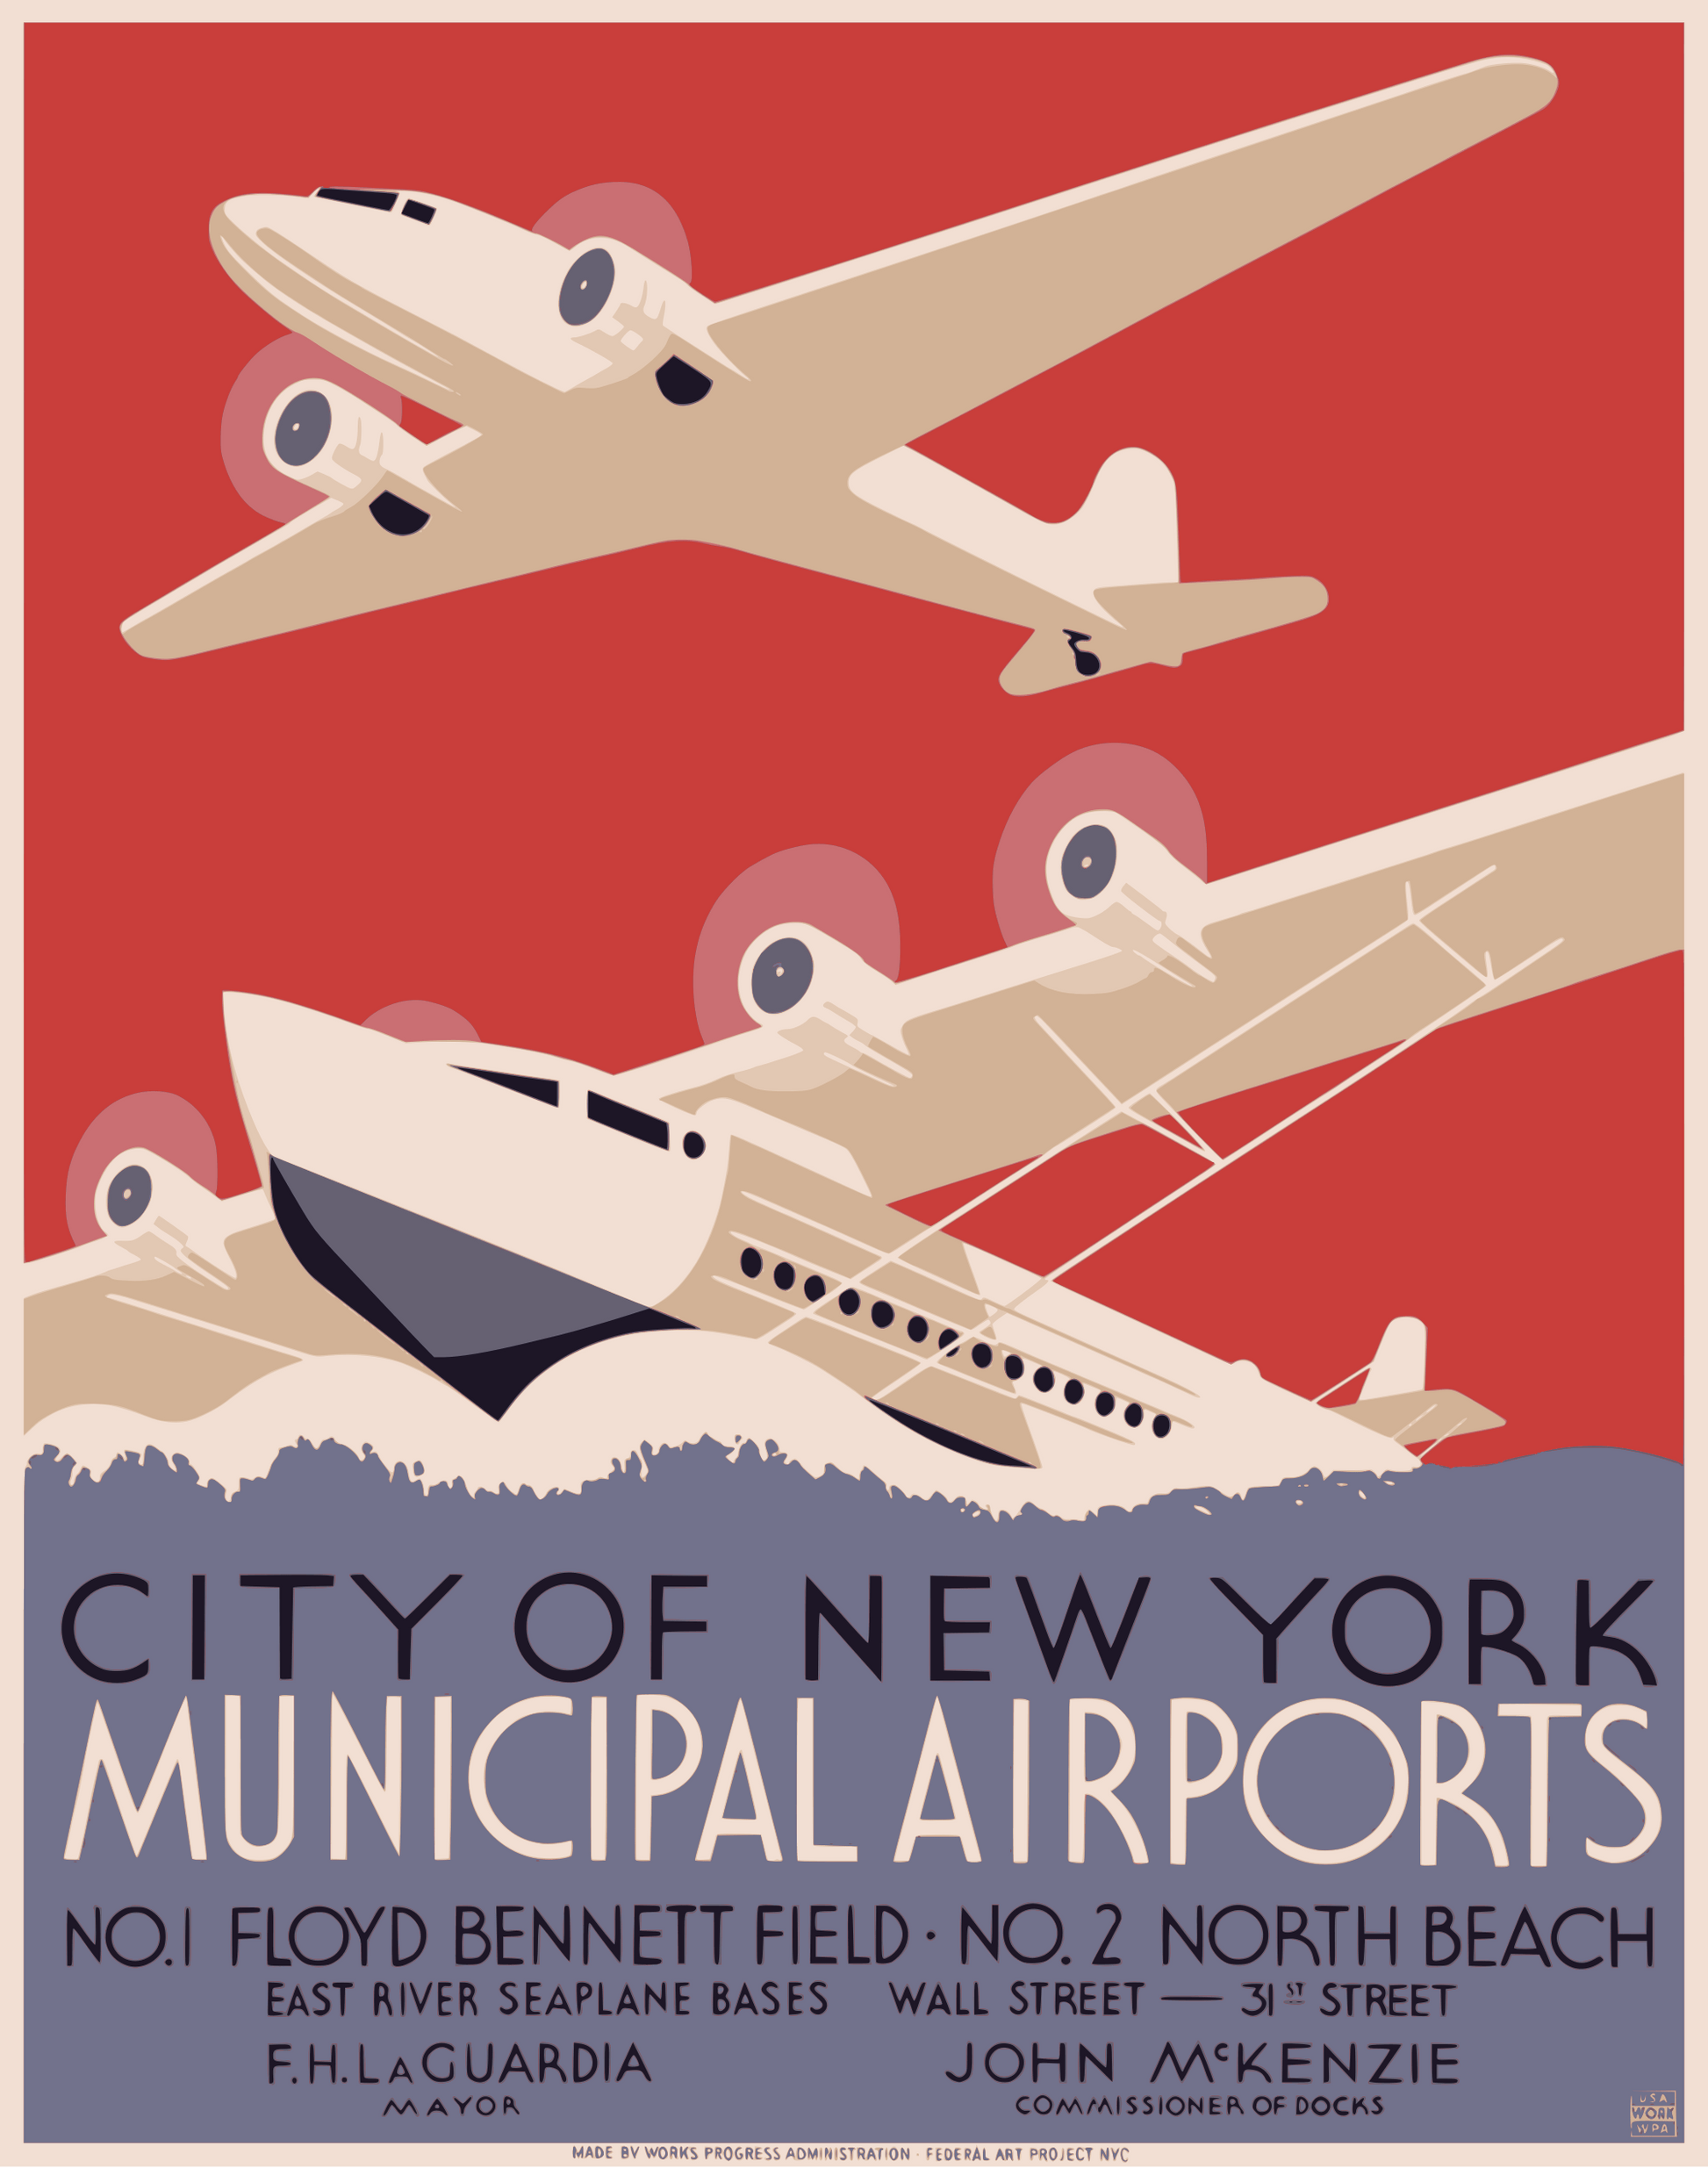 New York Airports (1930s) | Vintage New York Posters | Harry Herzog Posters, Prints, & Visual Artwork The Trumpet Shop   